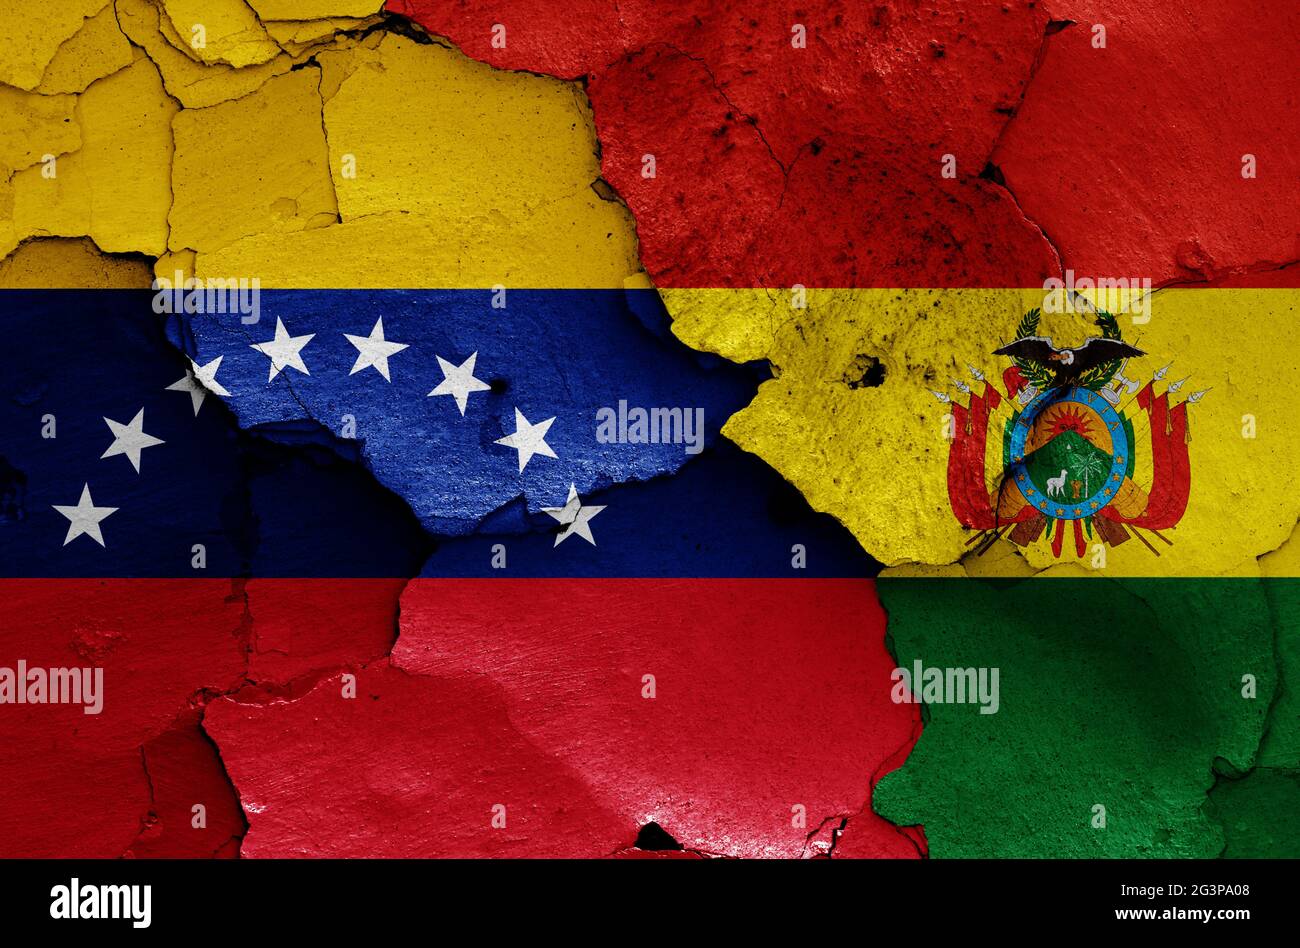 flags of Venezuela and Bolivia painted on cracked wall Stock Photo